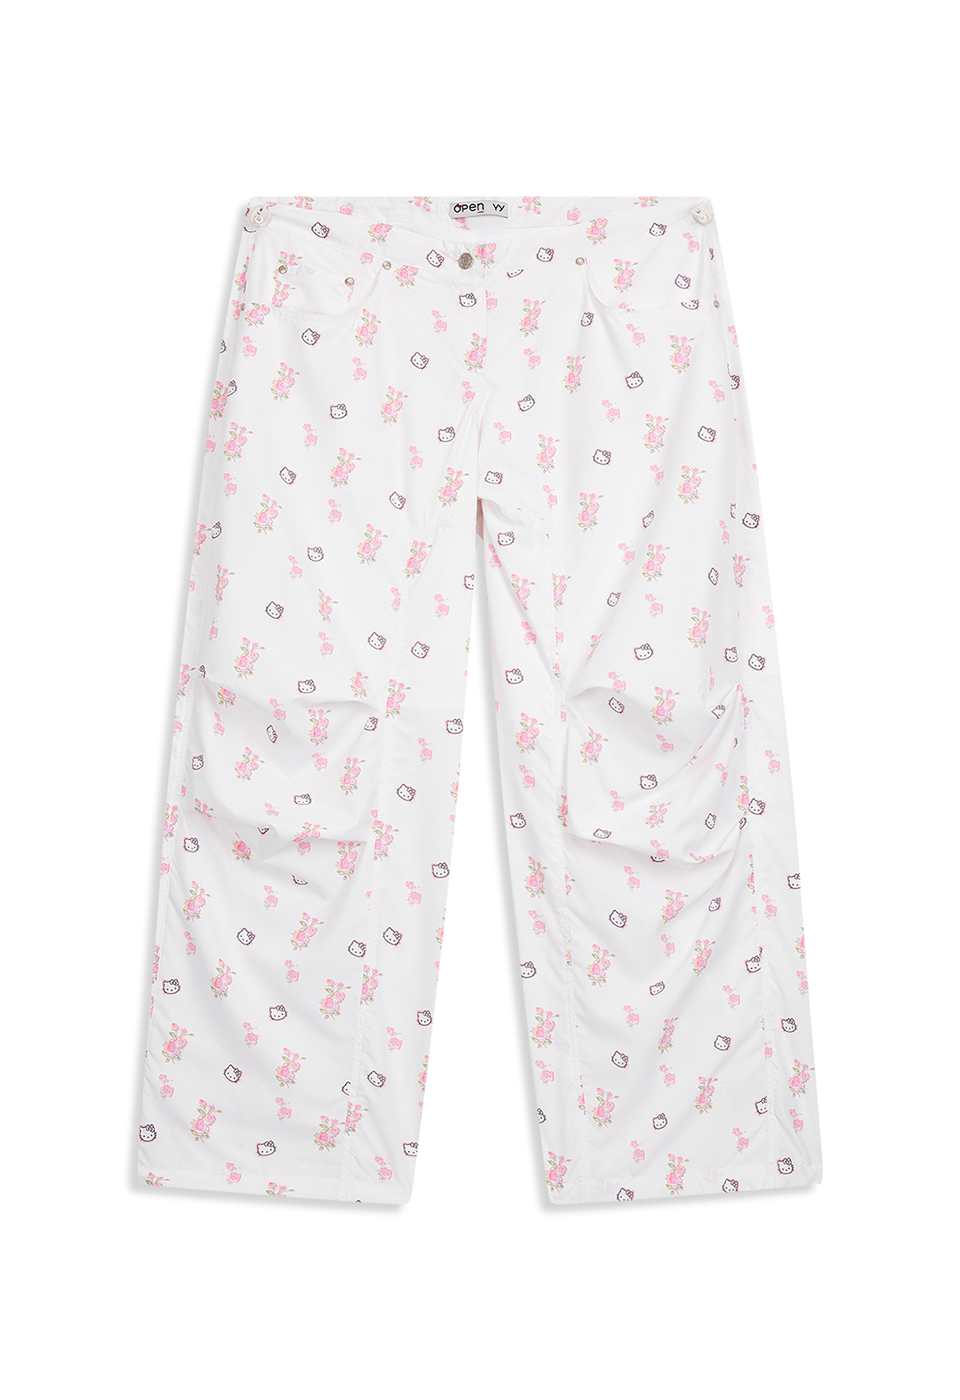 [6/7 DELIVERY] HELLO KITTY X YY PARACHUTE PANTS, WHITE